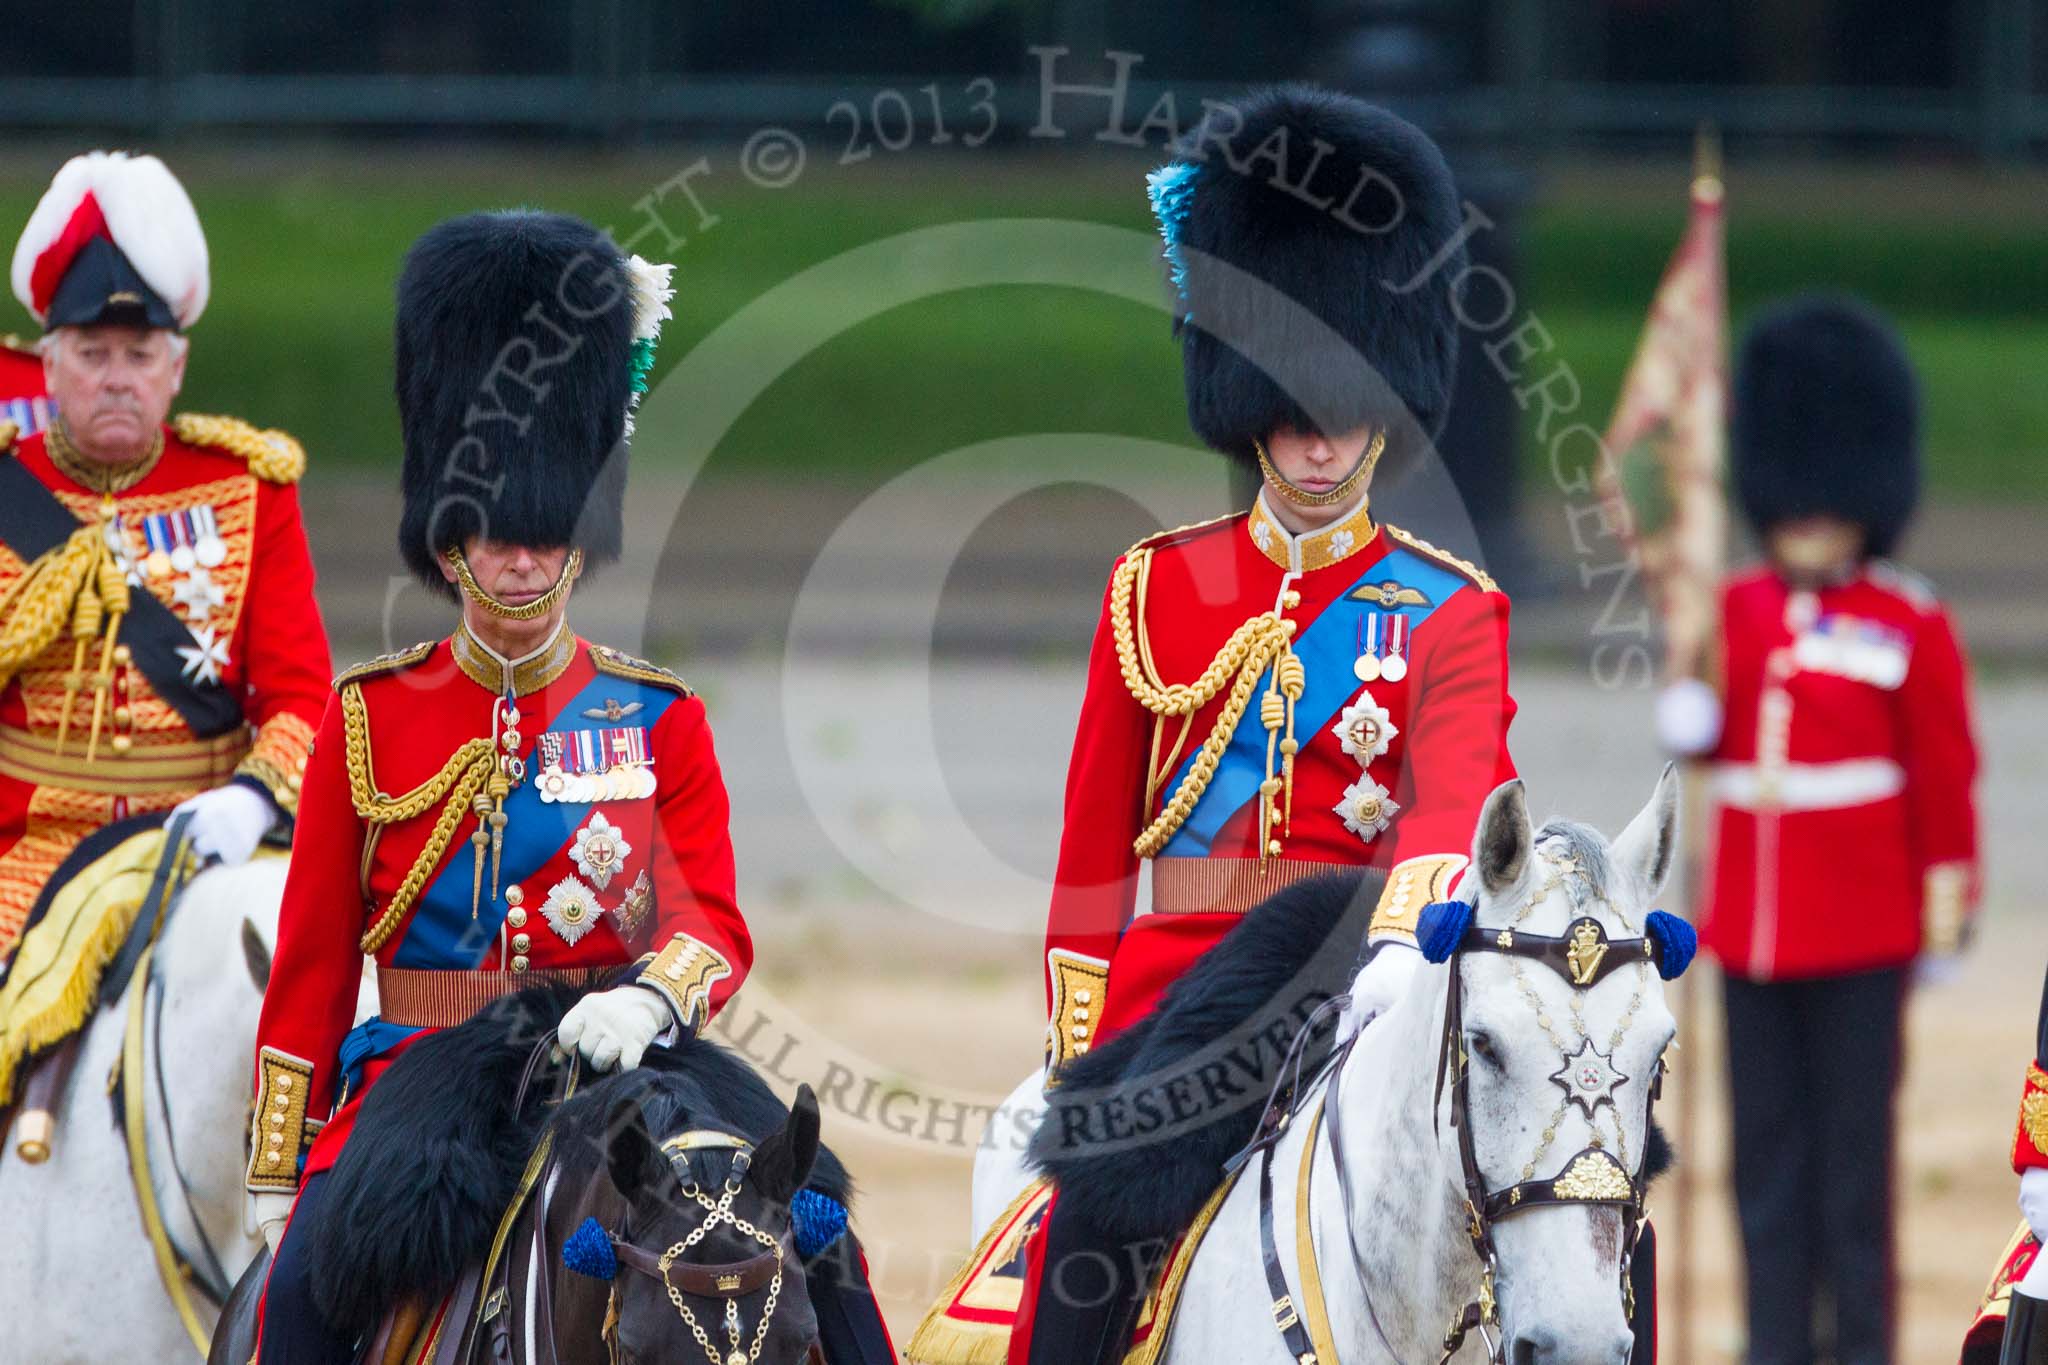 Trooping the Colour 2015. Image #298, 13 June 2015 11:05 Horse Guards Parade, London, UK